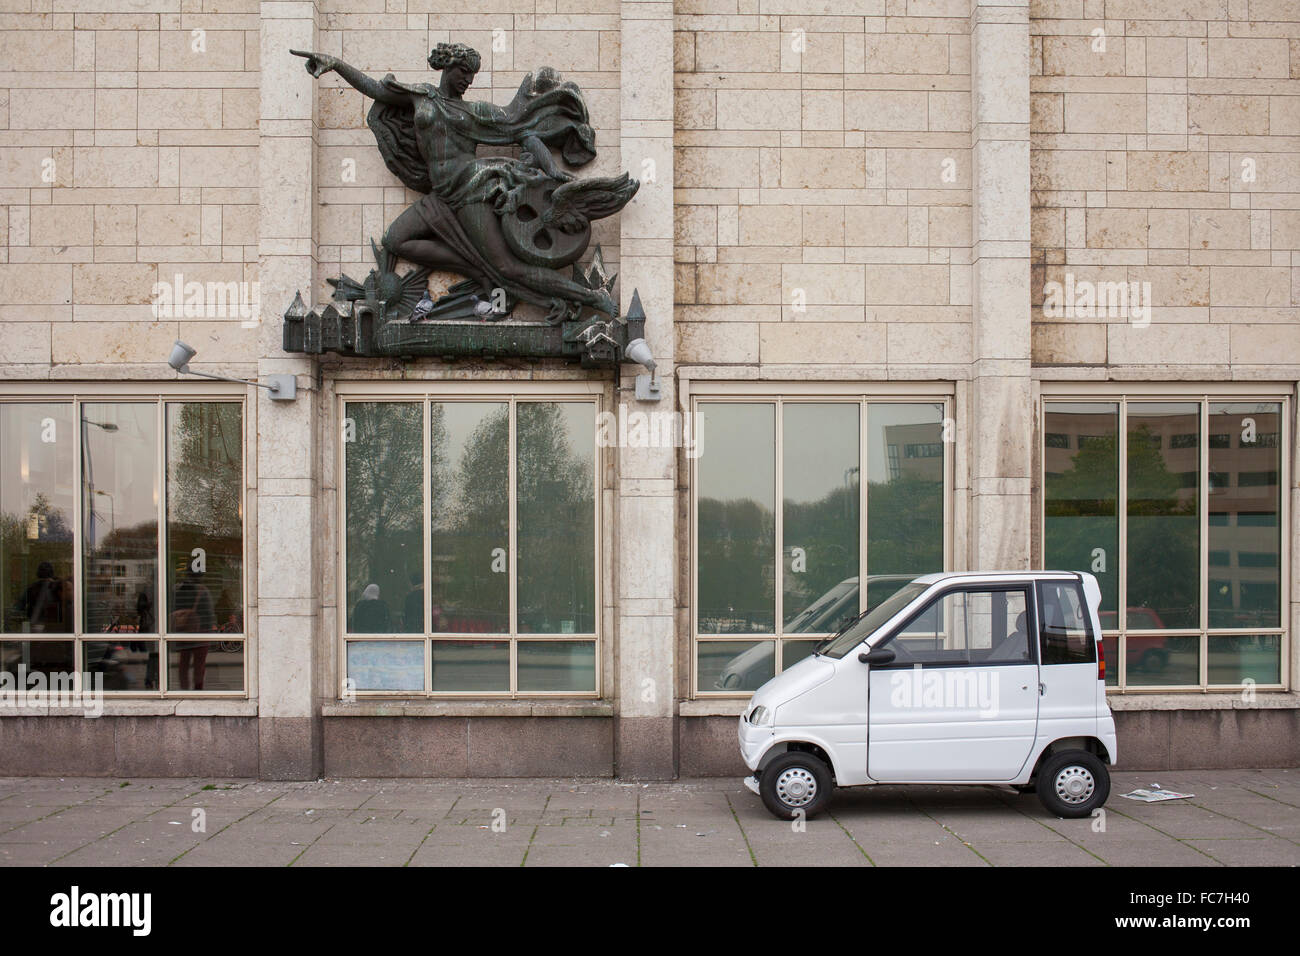 Compact car parked under sculpture on building Stock Photo